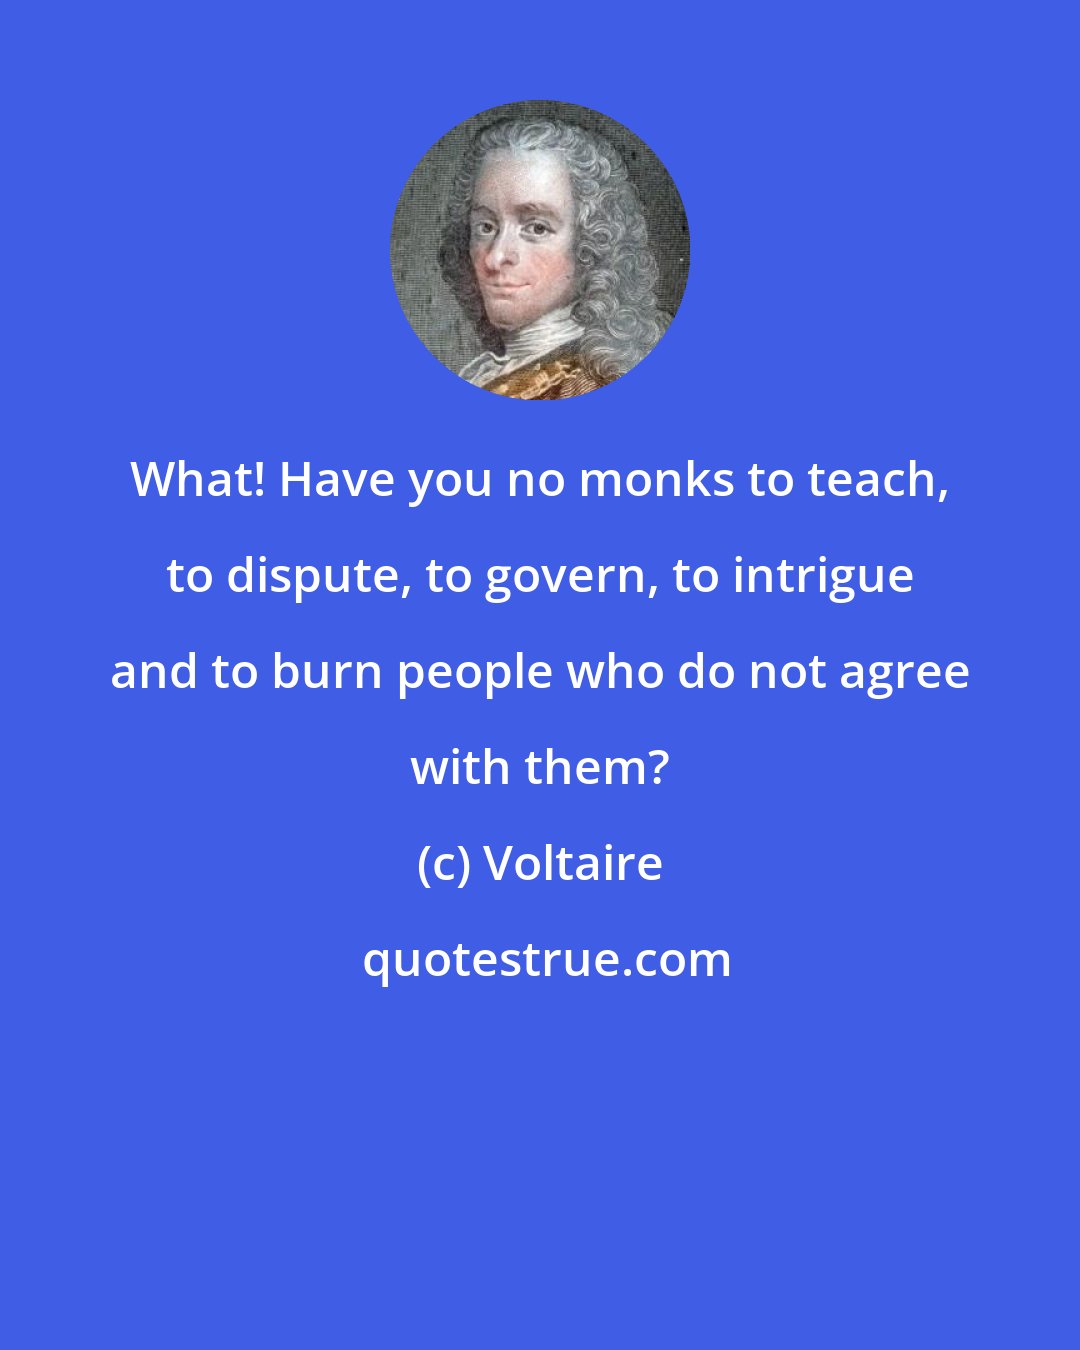 Voltaire: What! Have you no monks to teach, to dispute, to govern, to intrigue and to burn people who do not agree with them?